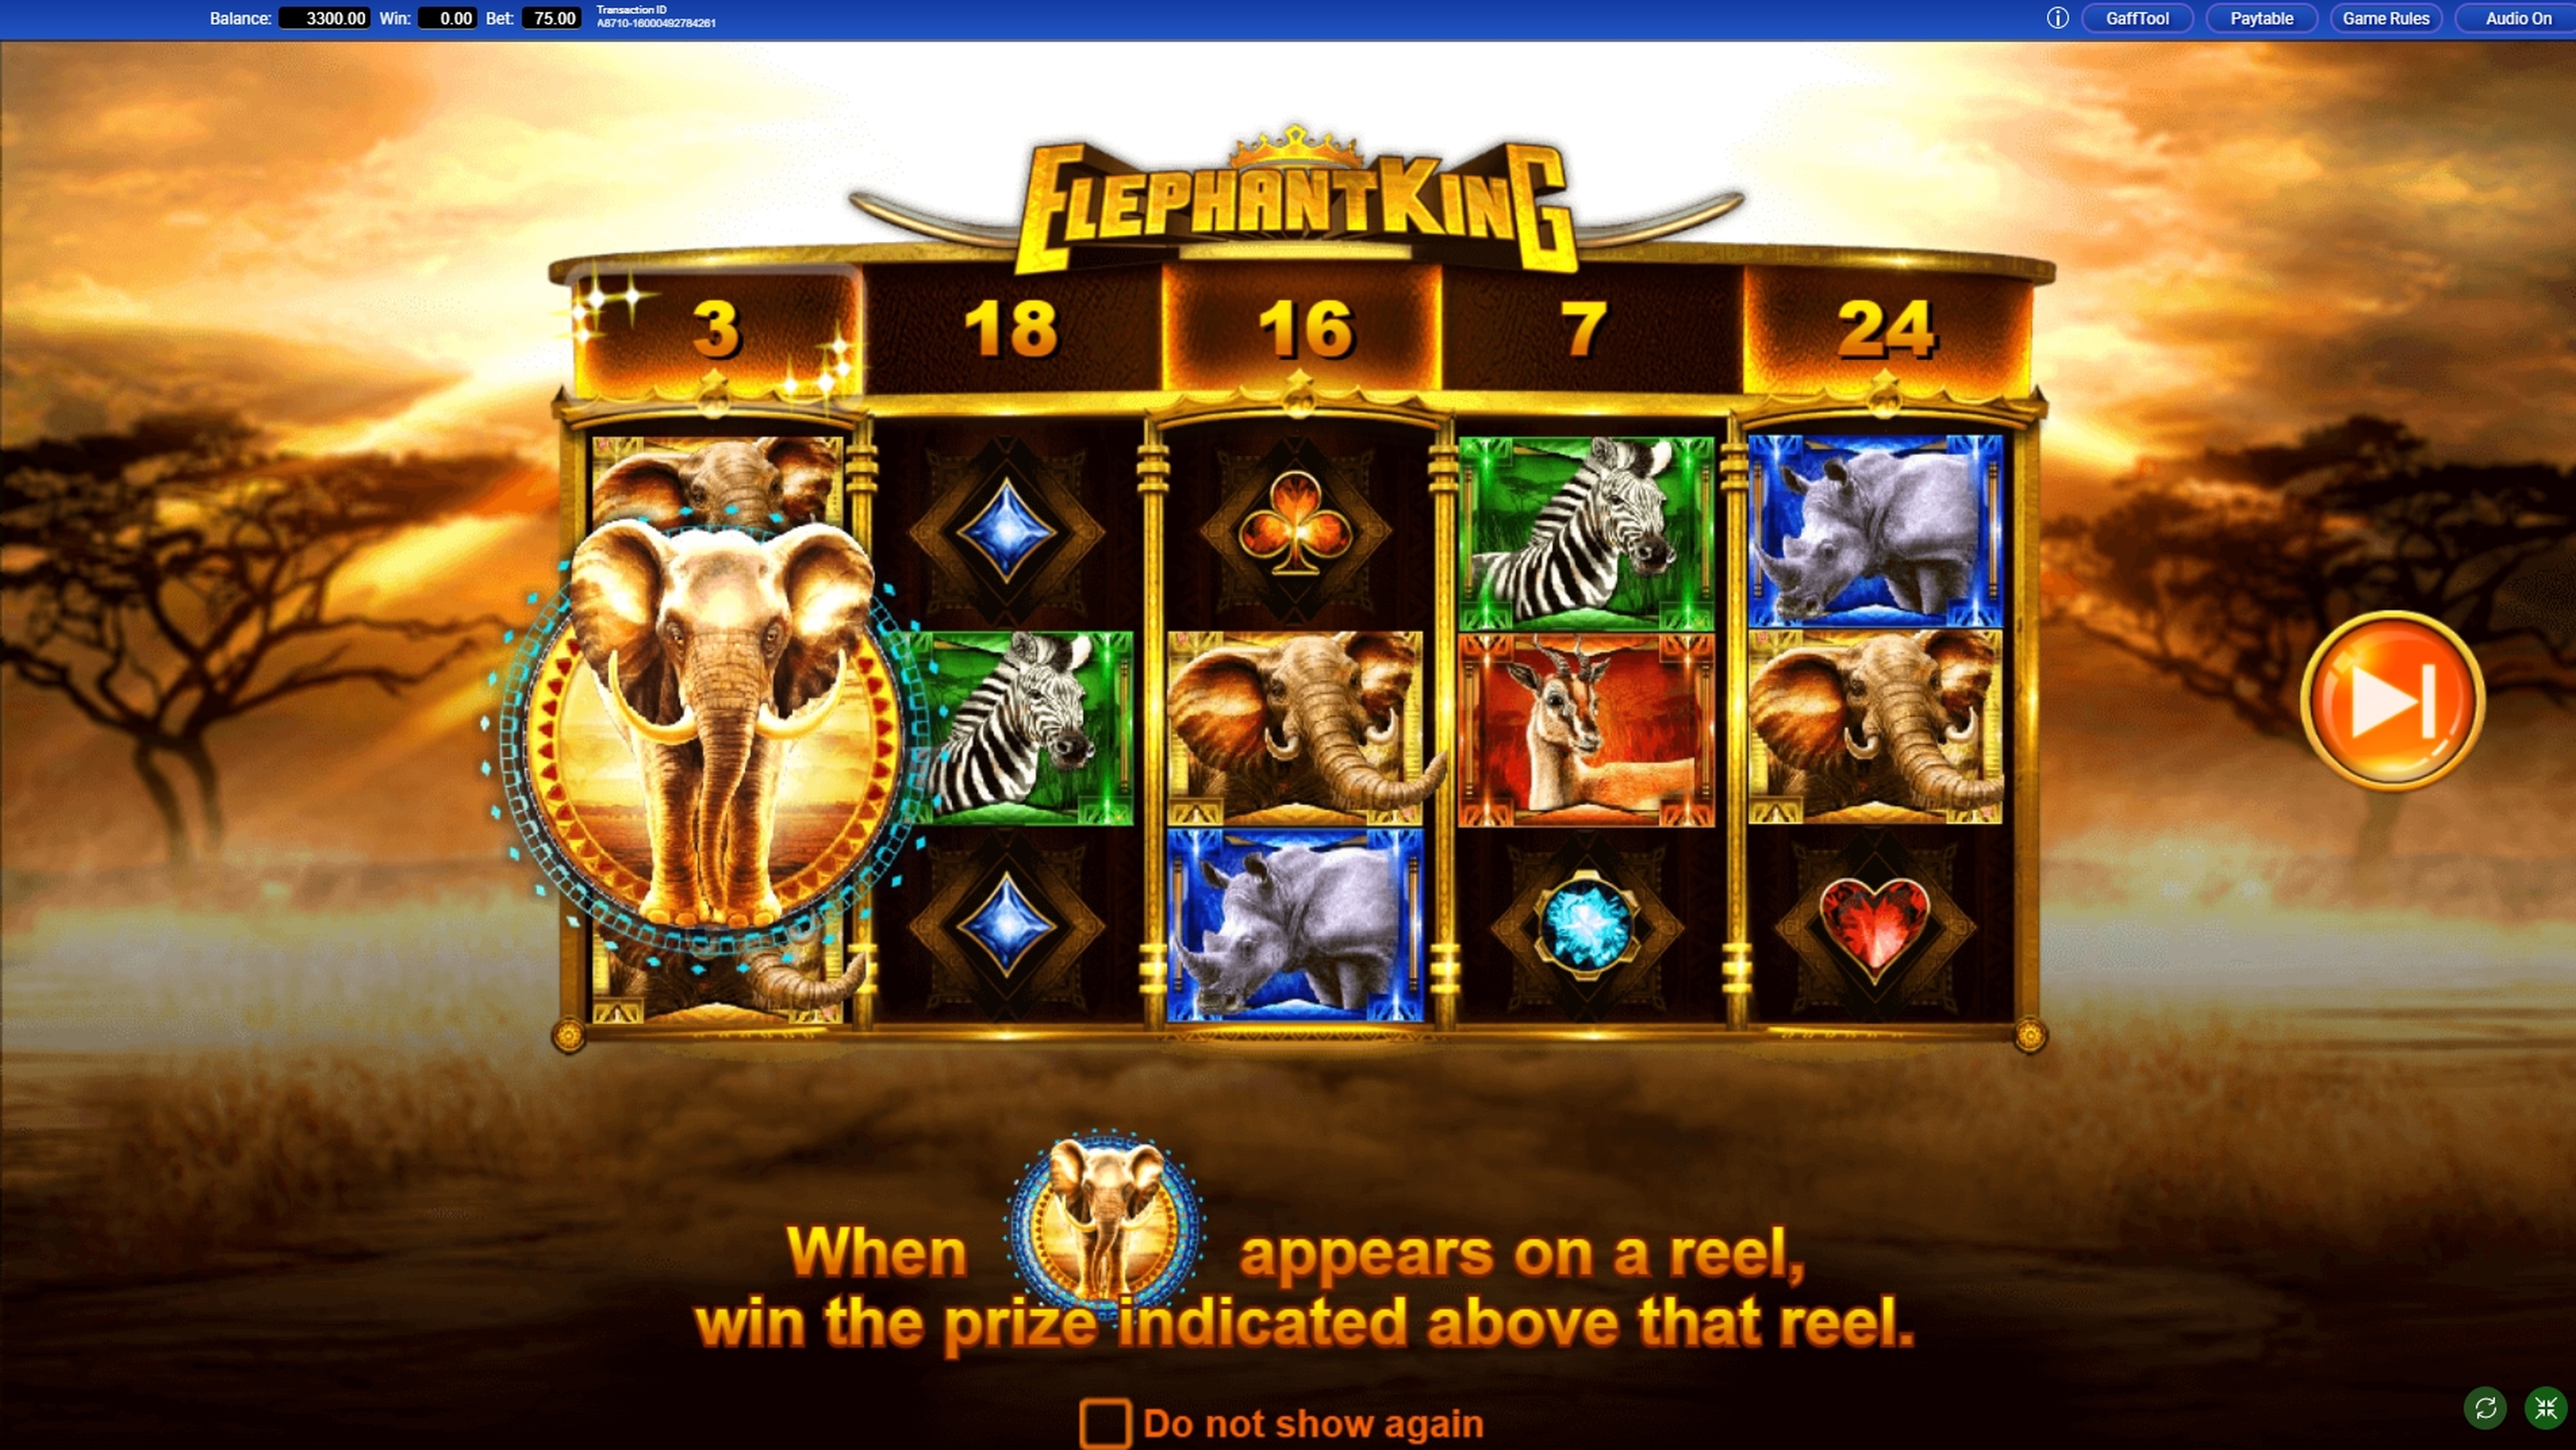 Play Elephant King Free Casino Slot Game by IGT